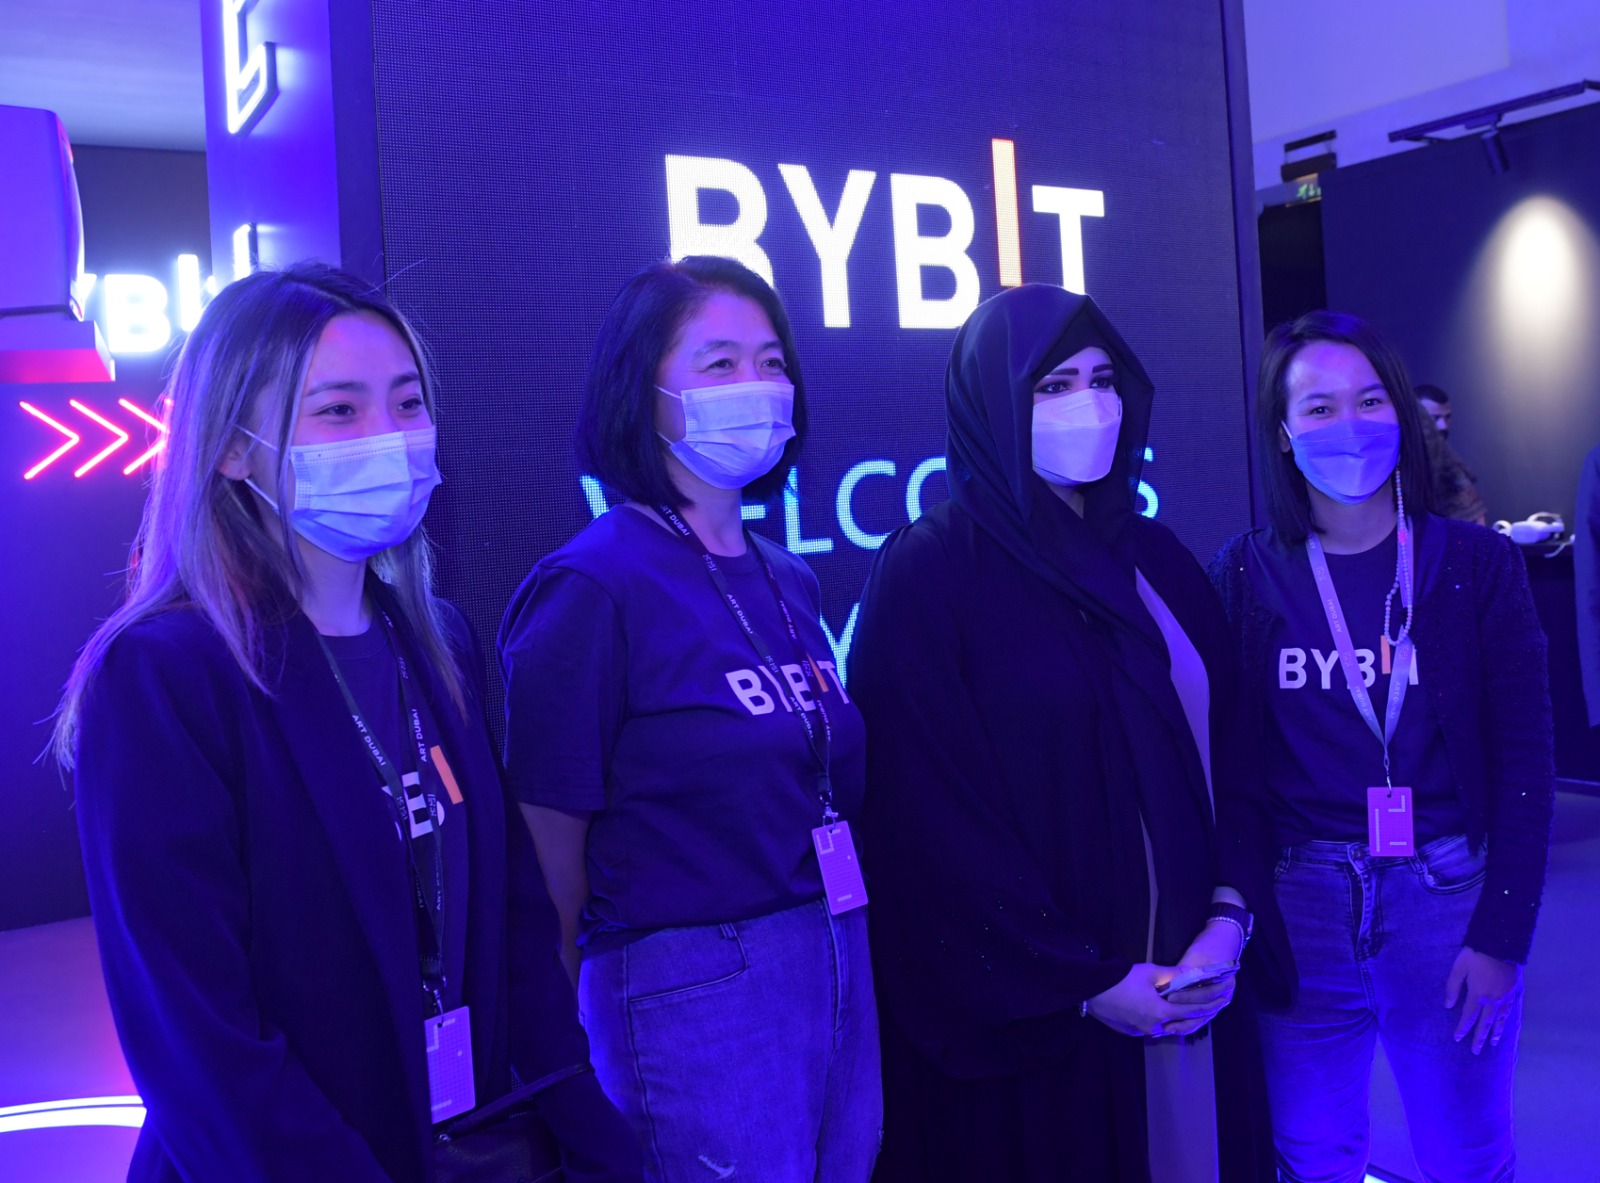 Bybit is delighted to welcome Her Highness Sheikha Latifa bint Mohammed bin Rashid Al Maktoum into the Bybit universe for our inaugural participation as Lead Partner of Art Dubai 2022 on March 9, 2022